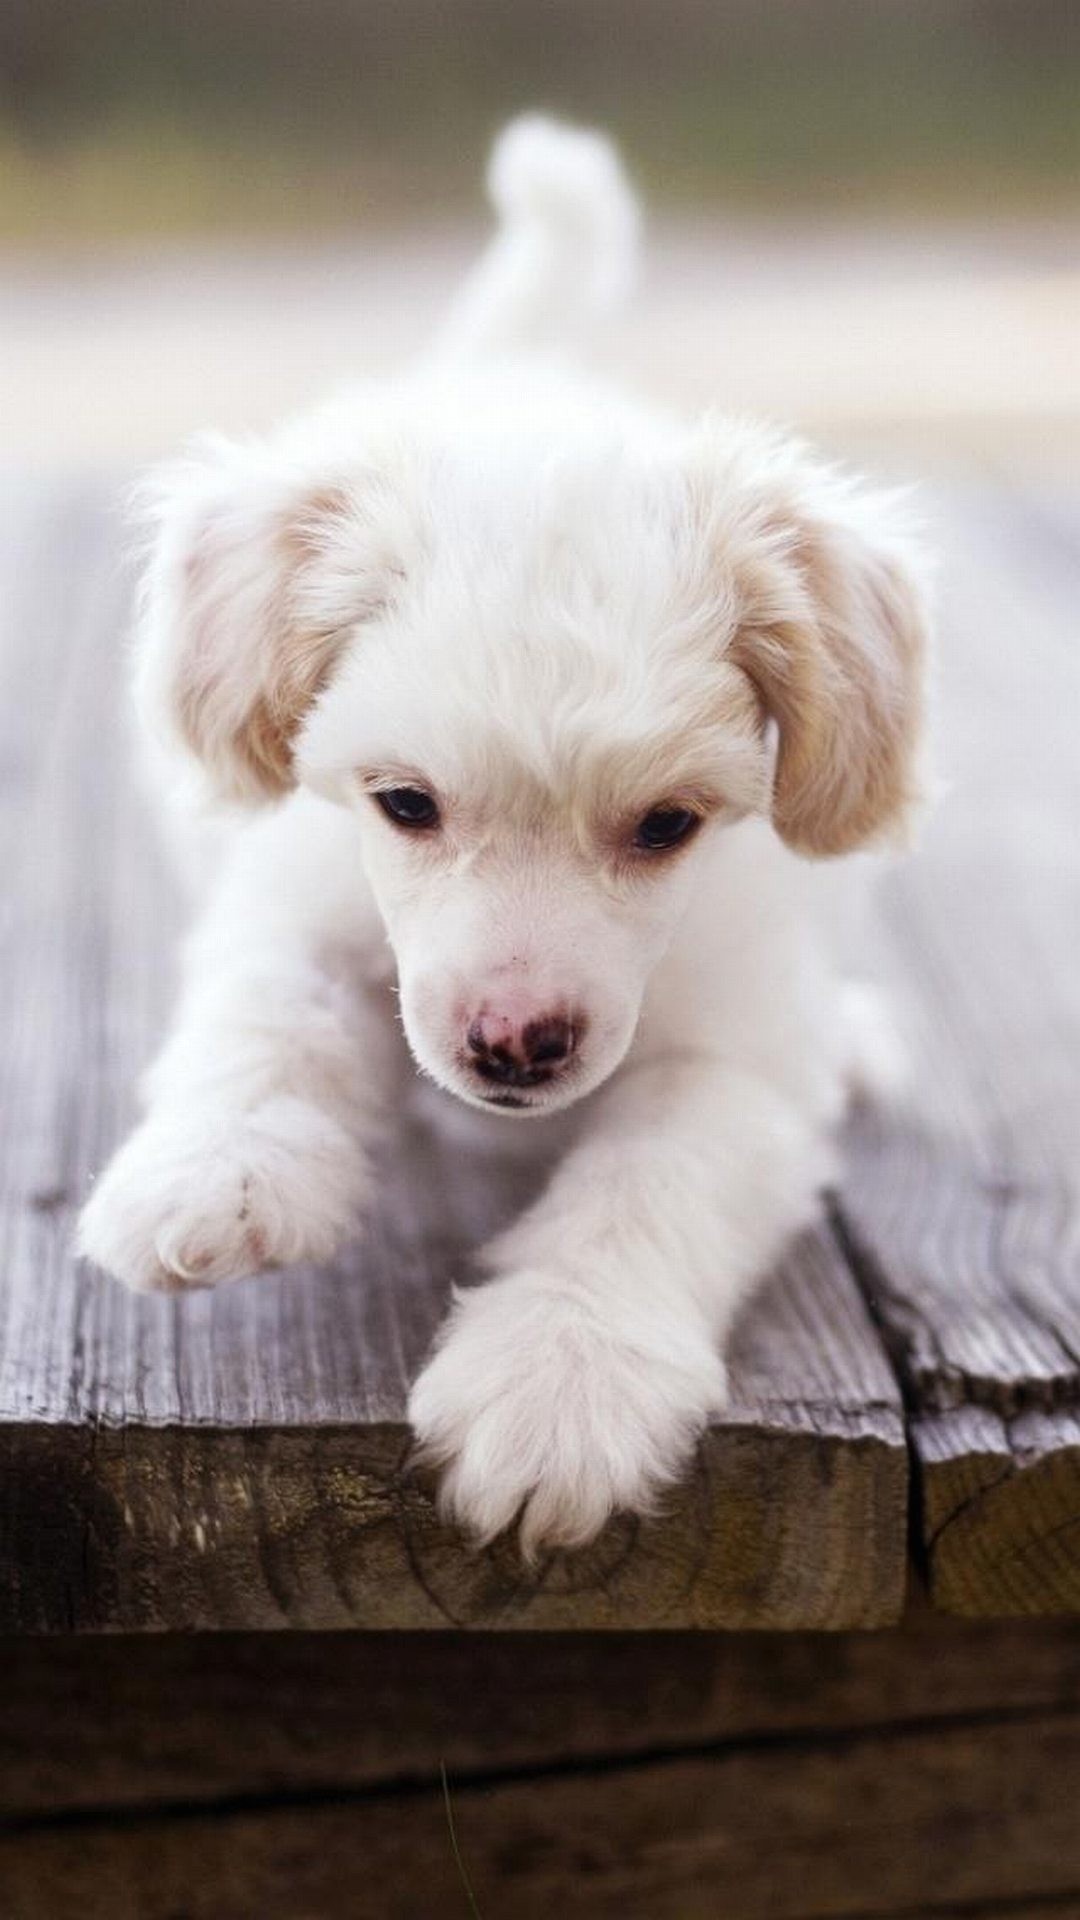 1080x1920 Cute Puppies Wallpapers for iPhone. Animals Phone Backgrounds. | @mobile9